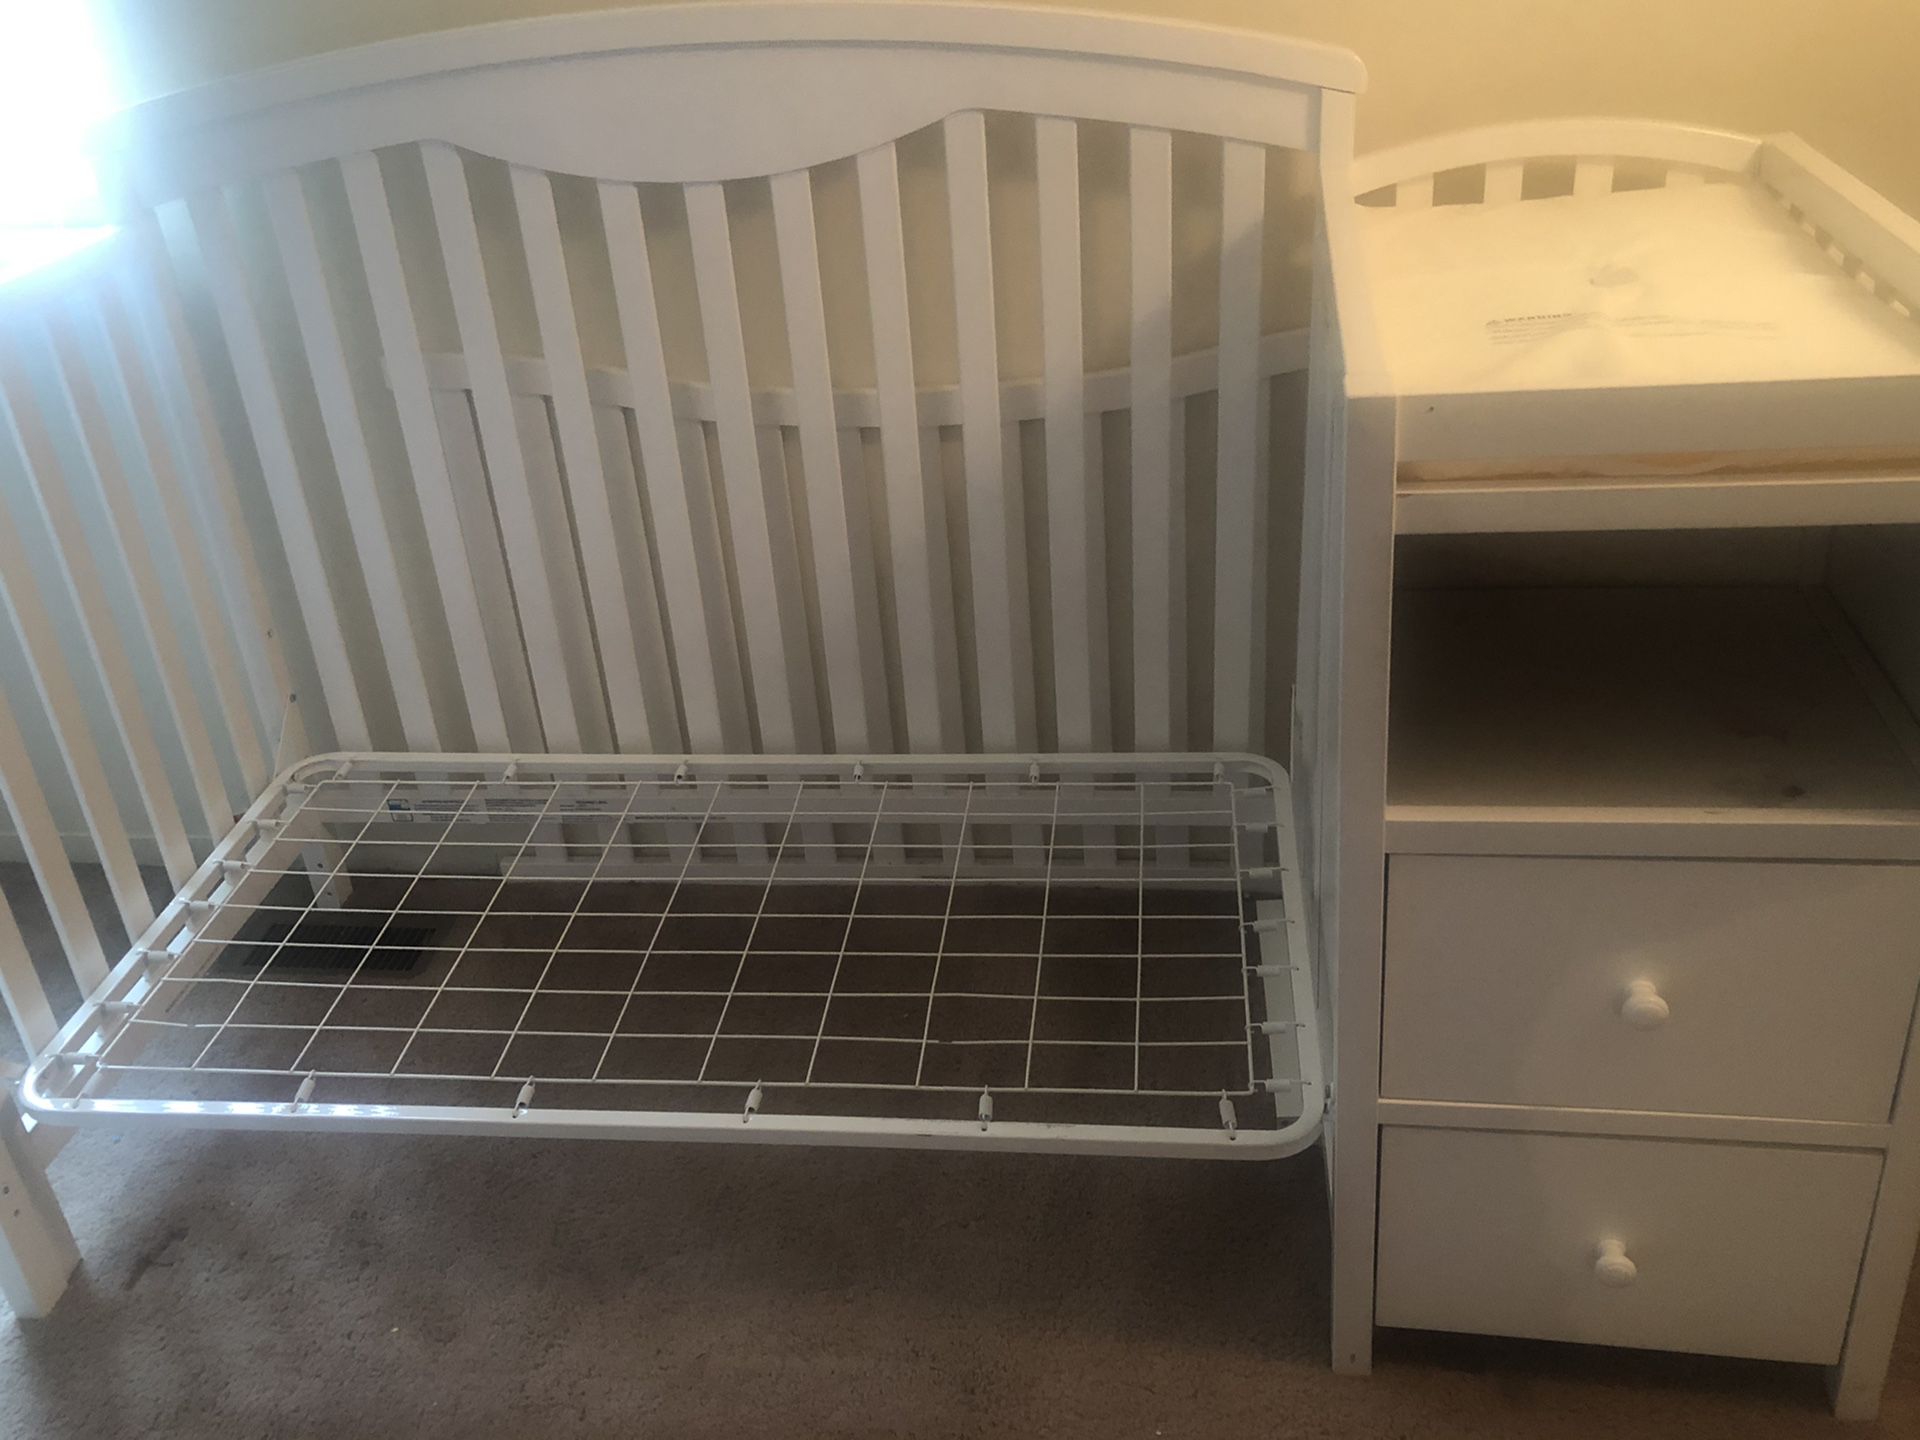 Toddler bed from convertible crib